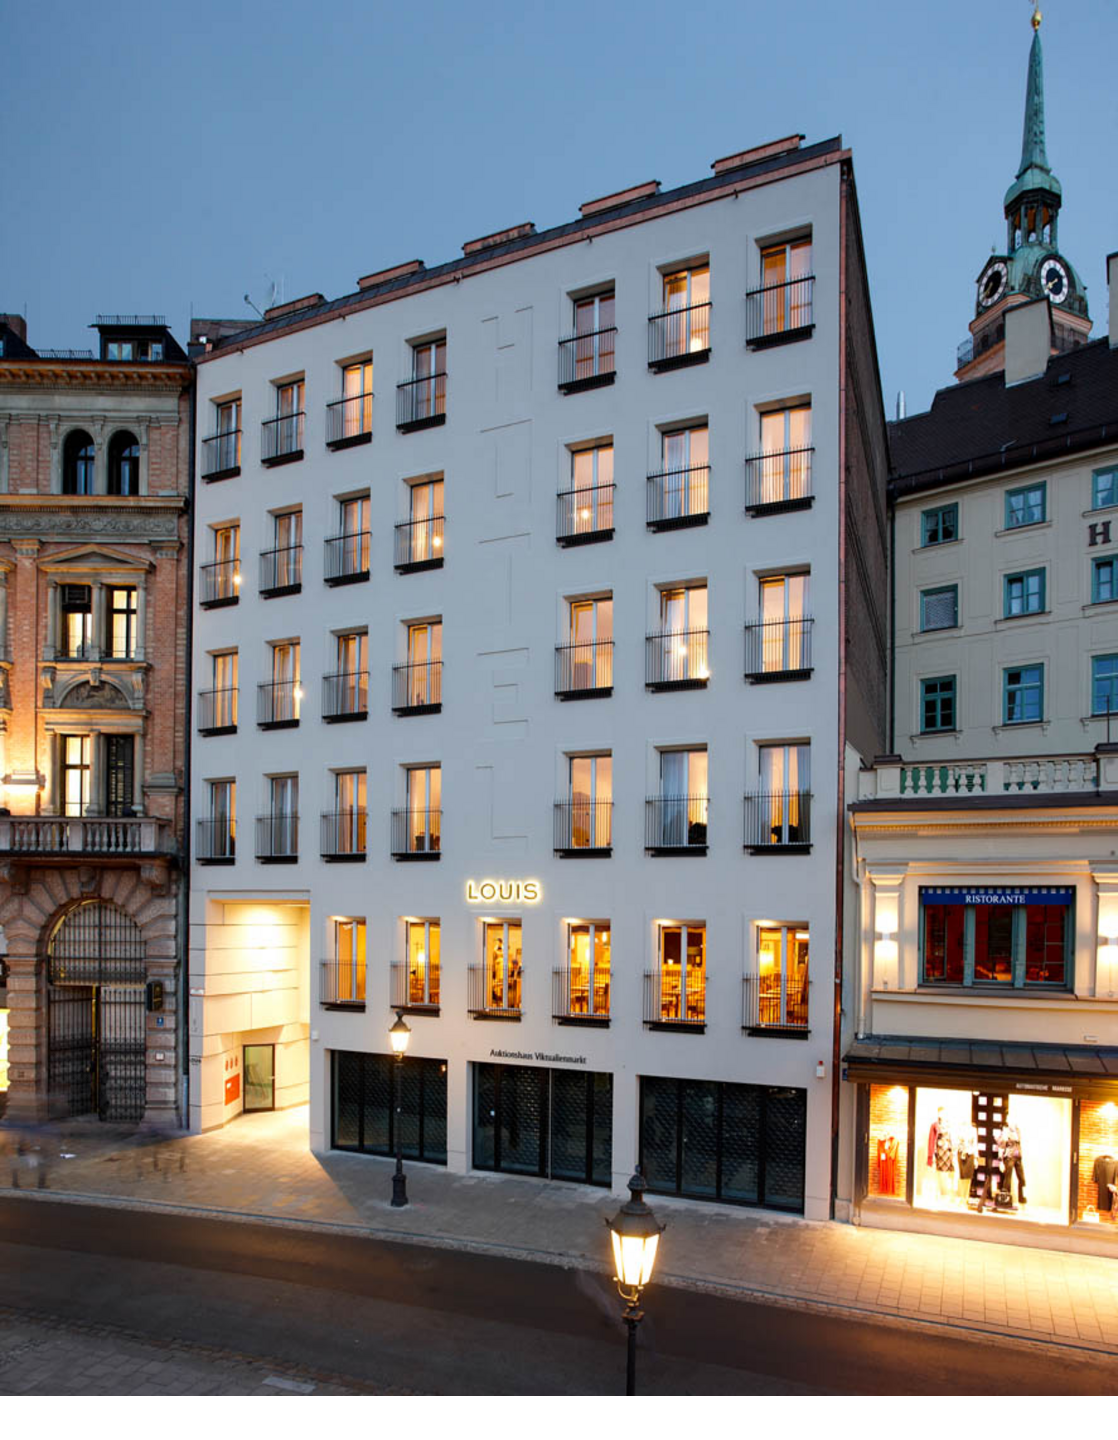 Exterior view at night LOUIS Hotel Munich